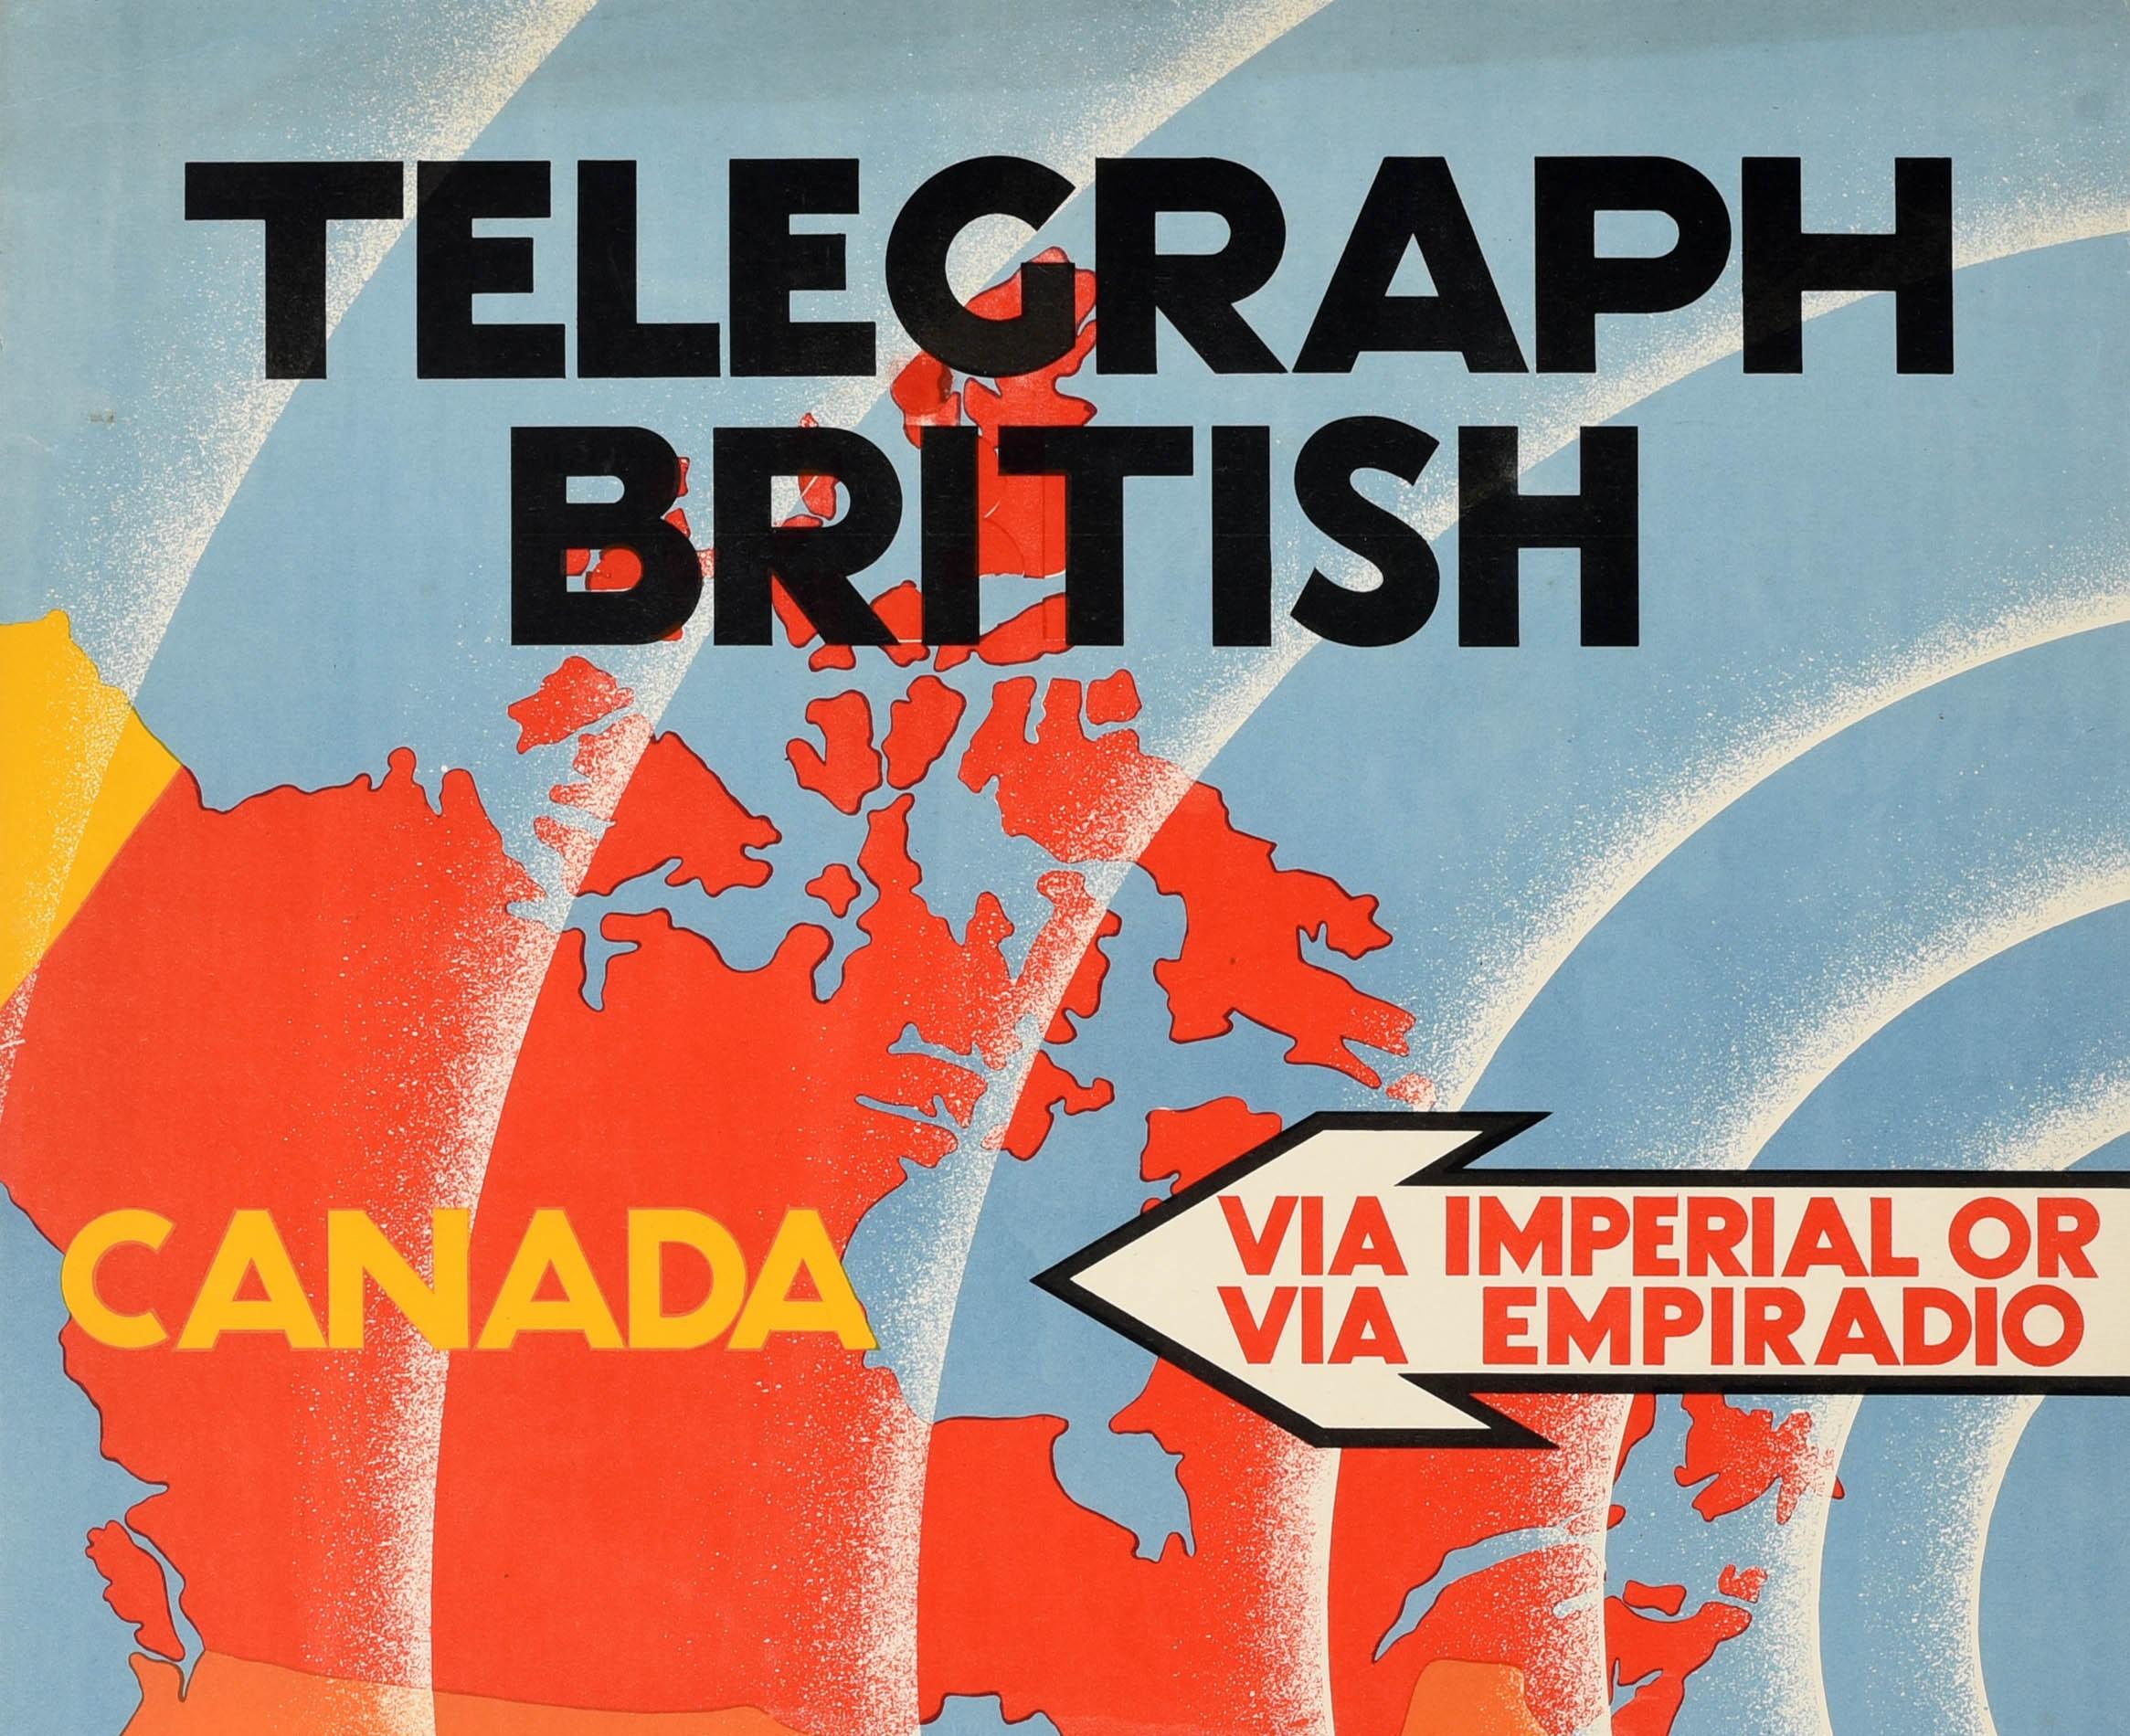 Original vintage advertising poster - Telegraph British Canada via Imperial or via Empiradio USA via Marconi British Capital British Enterprise British Labour - featuring a great design by the notable commercial artist and poster designer Albert